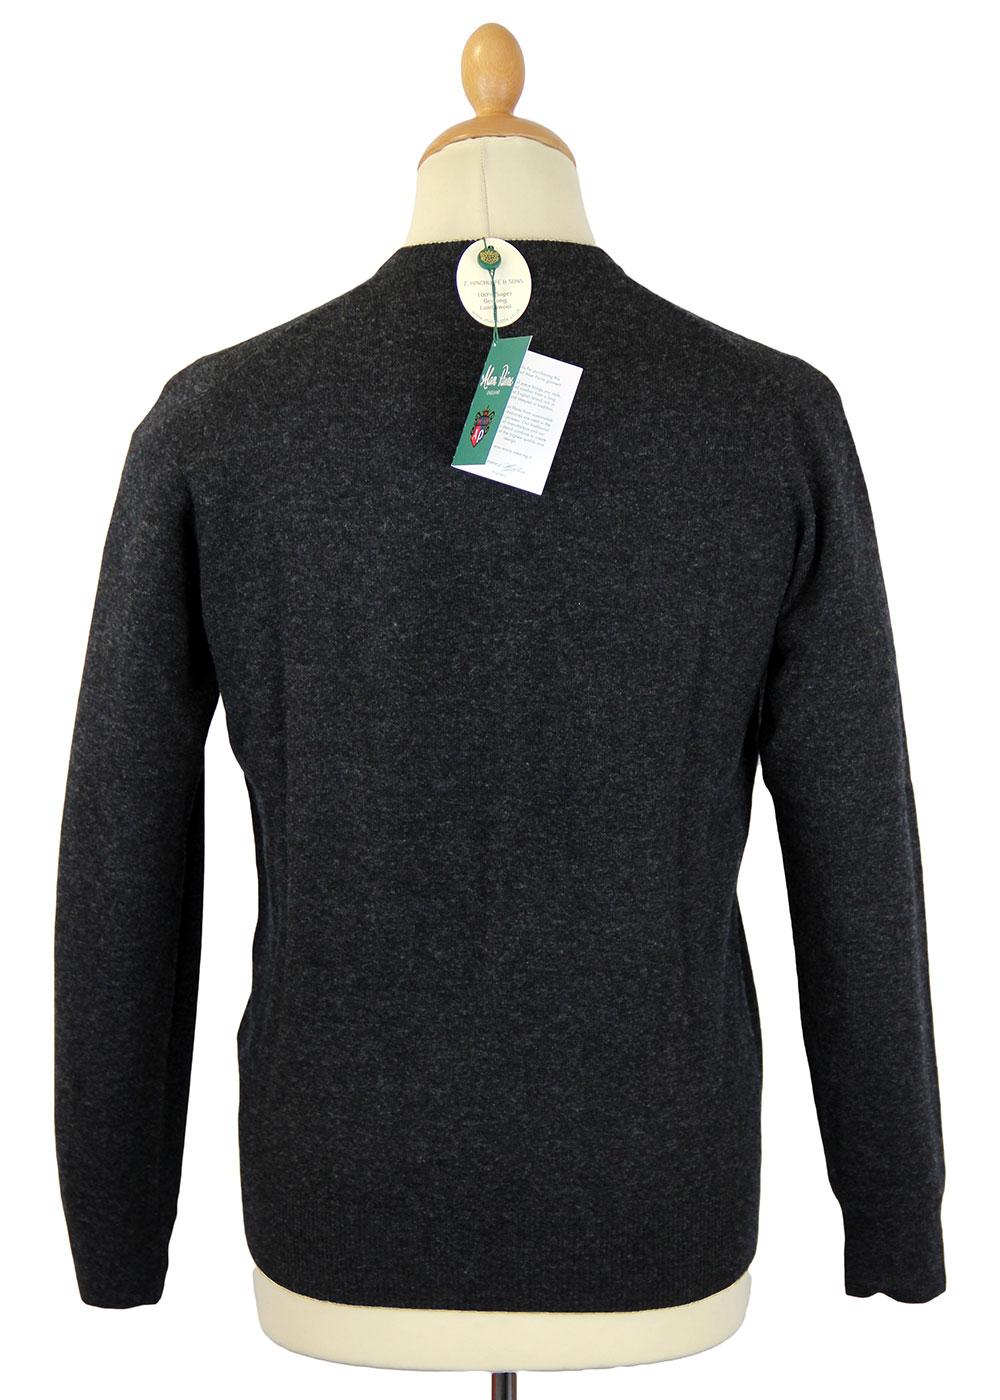 ALAN PAINE Albury Retro 60s Mod V-Neck Wool Jumper in Charcoal